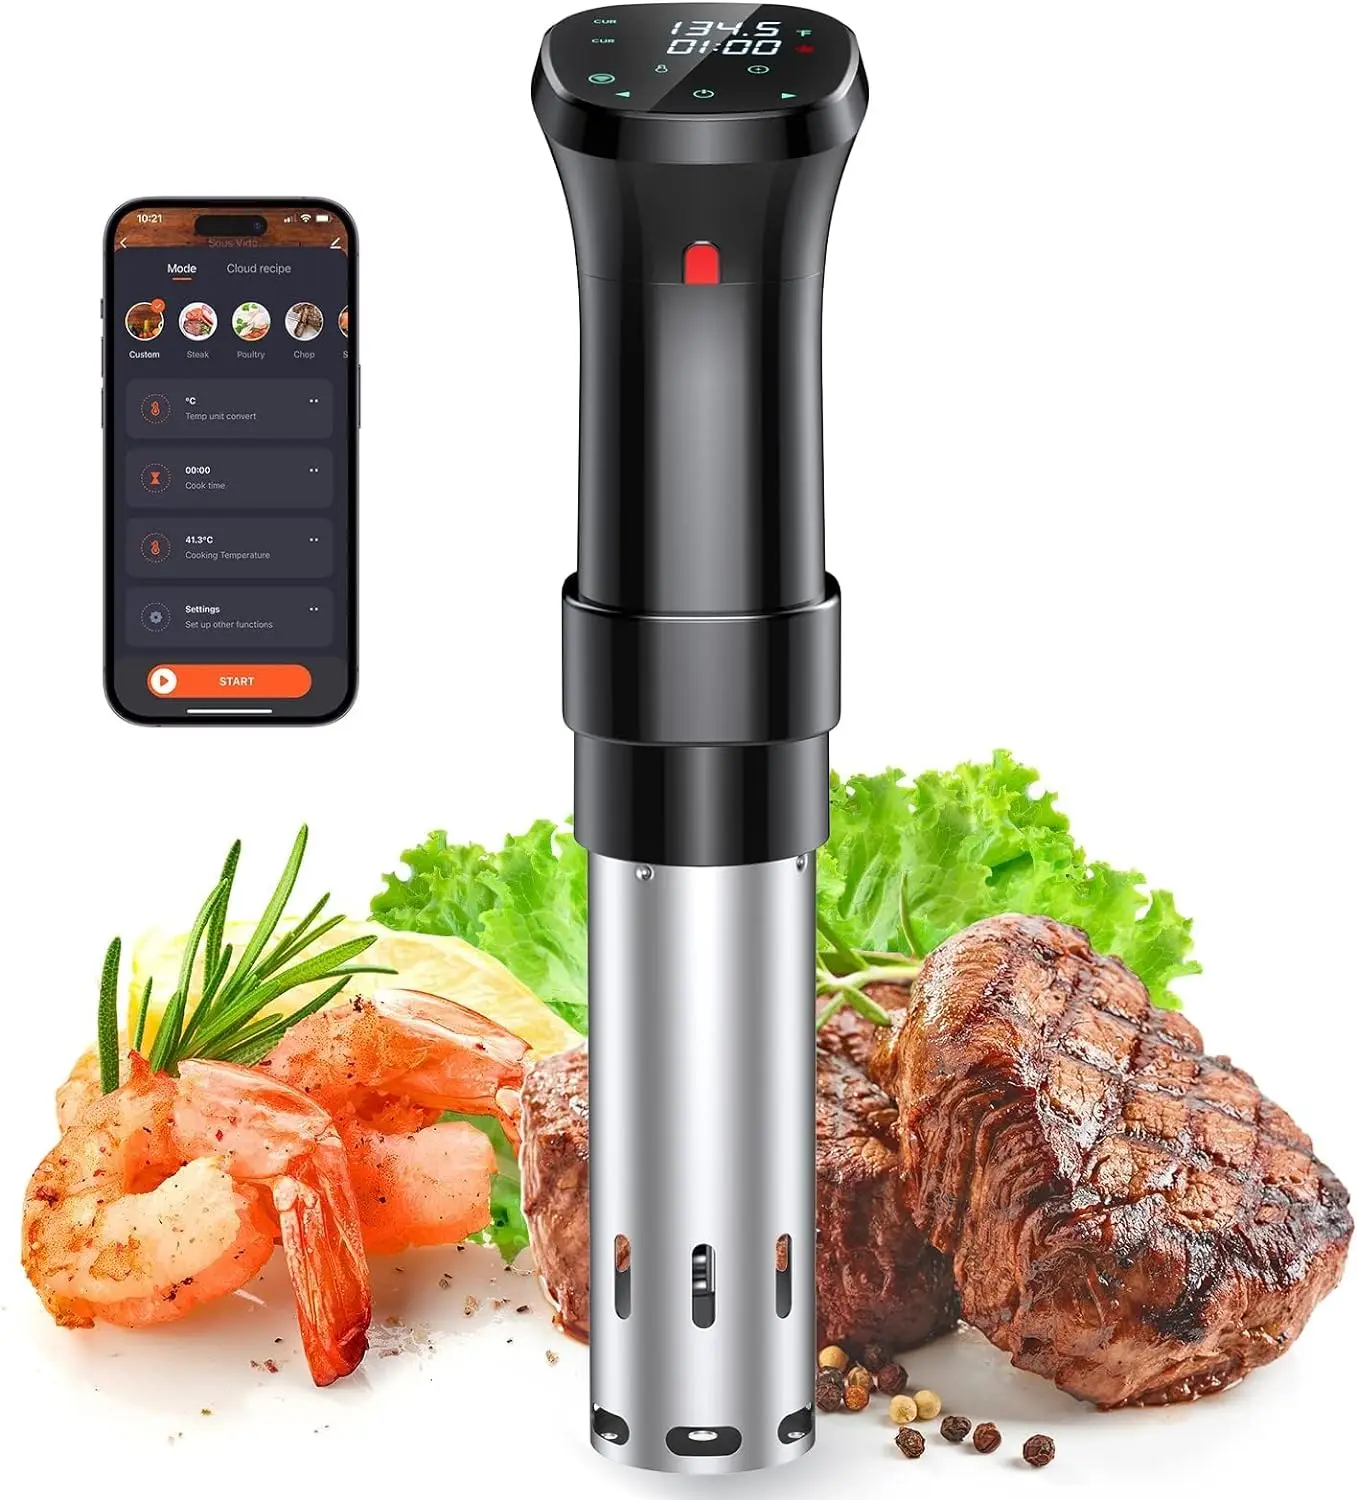 

Vide Machines,Joule Sous Vide Cooker 1100W, Wifi Connect App Control with Recipe Ultra-quiet Fast-Heating Immersion Circulator T